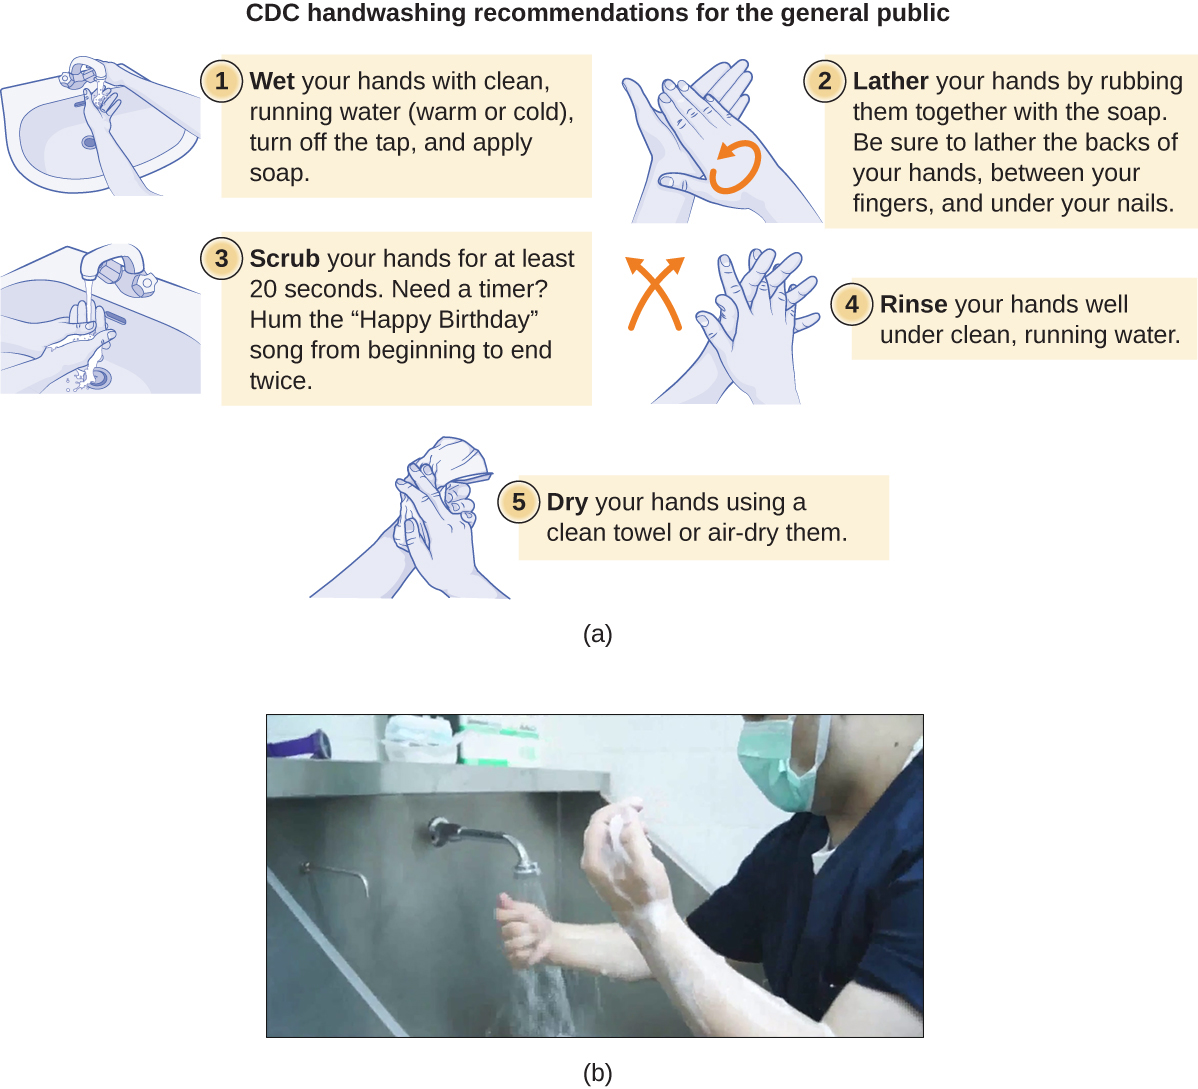 a) CDC handwashing recommendations for the general public. 1 – wet your hands with clean, running water (warm or cold). Turn off the tap and apply soap. 2 – Lather your hands by rubbing them together with the soap. Be sure to lather the backs of your hands, between your fingers and under your nails. 3 – Scrub your hands for at least 20 seconds. Need a timer? Hum the “Happy birthday” song from beginning to end twice. 4 – Rinse your hands well under clean, running water. 5 – Dry your hands using a clean towel or air-dry them. B) A photo of a person washing their hands.